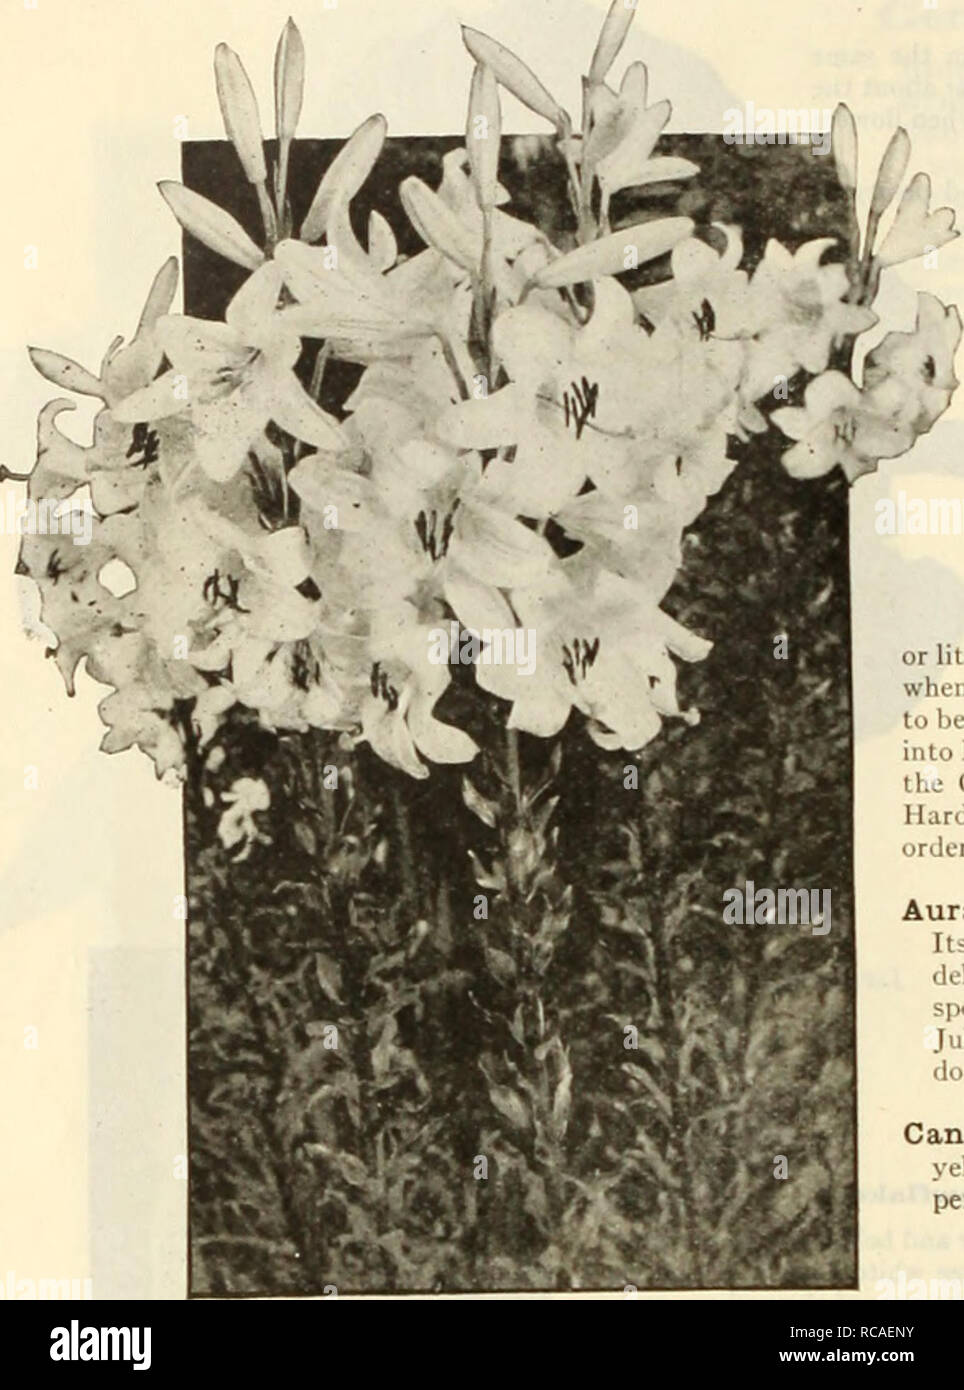 . Dreer's autumn catalogue 1925. Bulbs (Plants) Catalogs; Flowers Seeds Catalogs; Gardening Equipment and supplies Catalogs; Nurseries (Horticulture) Catalogs; Vegetables Seeds Catalogs. 26 /AEHKyAlMtEElL^ BULBS ''^H miL PLANTING |^HlLM&gt;HRlk. LILIUMS SPECIAL NOTICE.-L//&gt;' bulbs wilt be forwarded as they maiure. As a rule uv can jiirnish Candidum, Harrisii, Cauadense, Superbtim and Tenuijolium in September. The entire balance from late October to December. It is advisable to prepare your Lily bed early in the autumn and cover with j or 4 incites of litter. This will licep the ground from Stock Photo